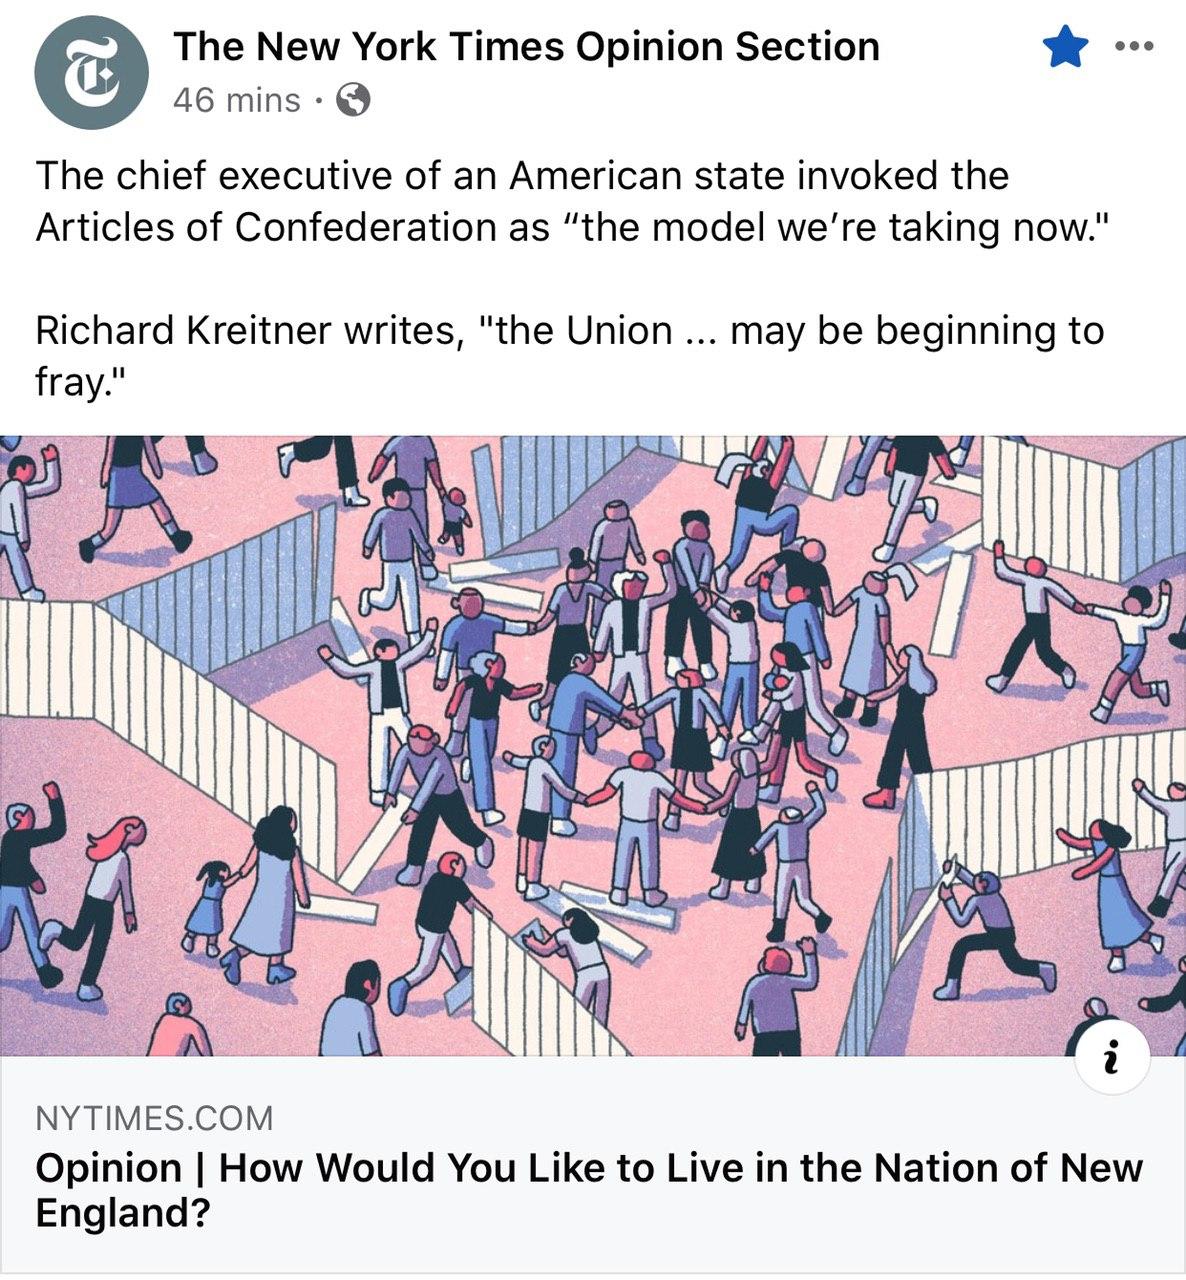 New York Times Goes Full Secession...Still Don't Believe This Is Chinese Propaganda?